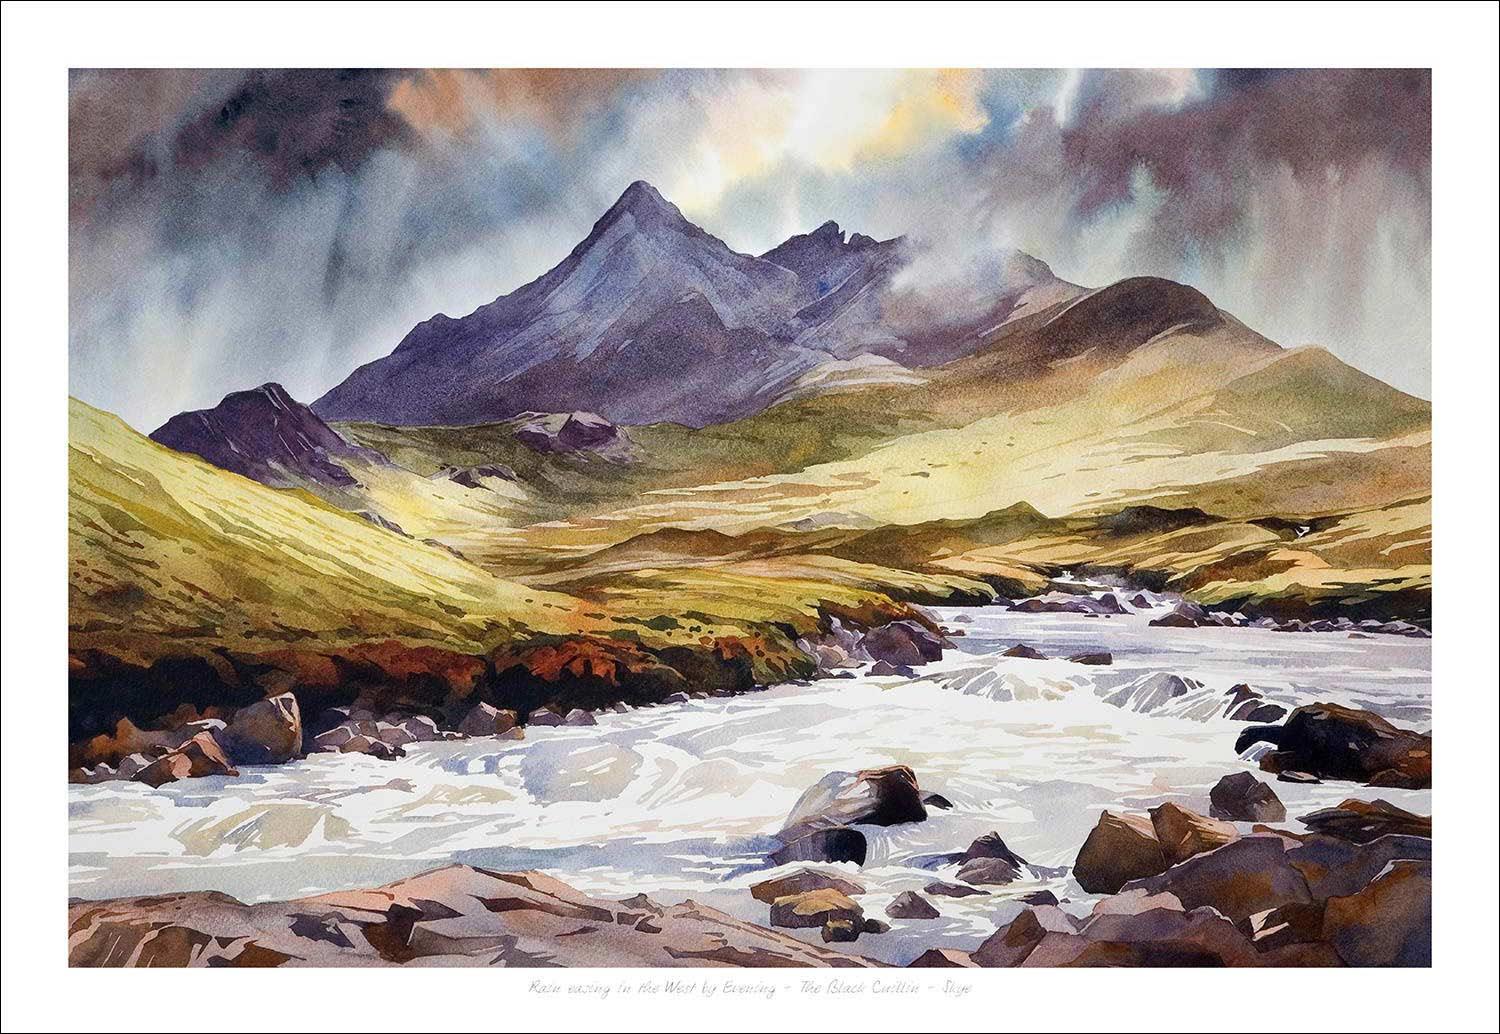 Rain easing in the west by evening, The Black Cuillin, Skye Art Print from an original painting by artist Peter McDermott